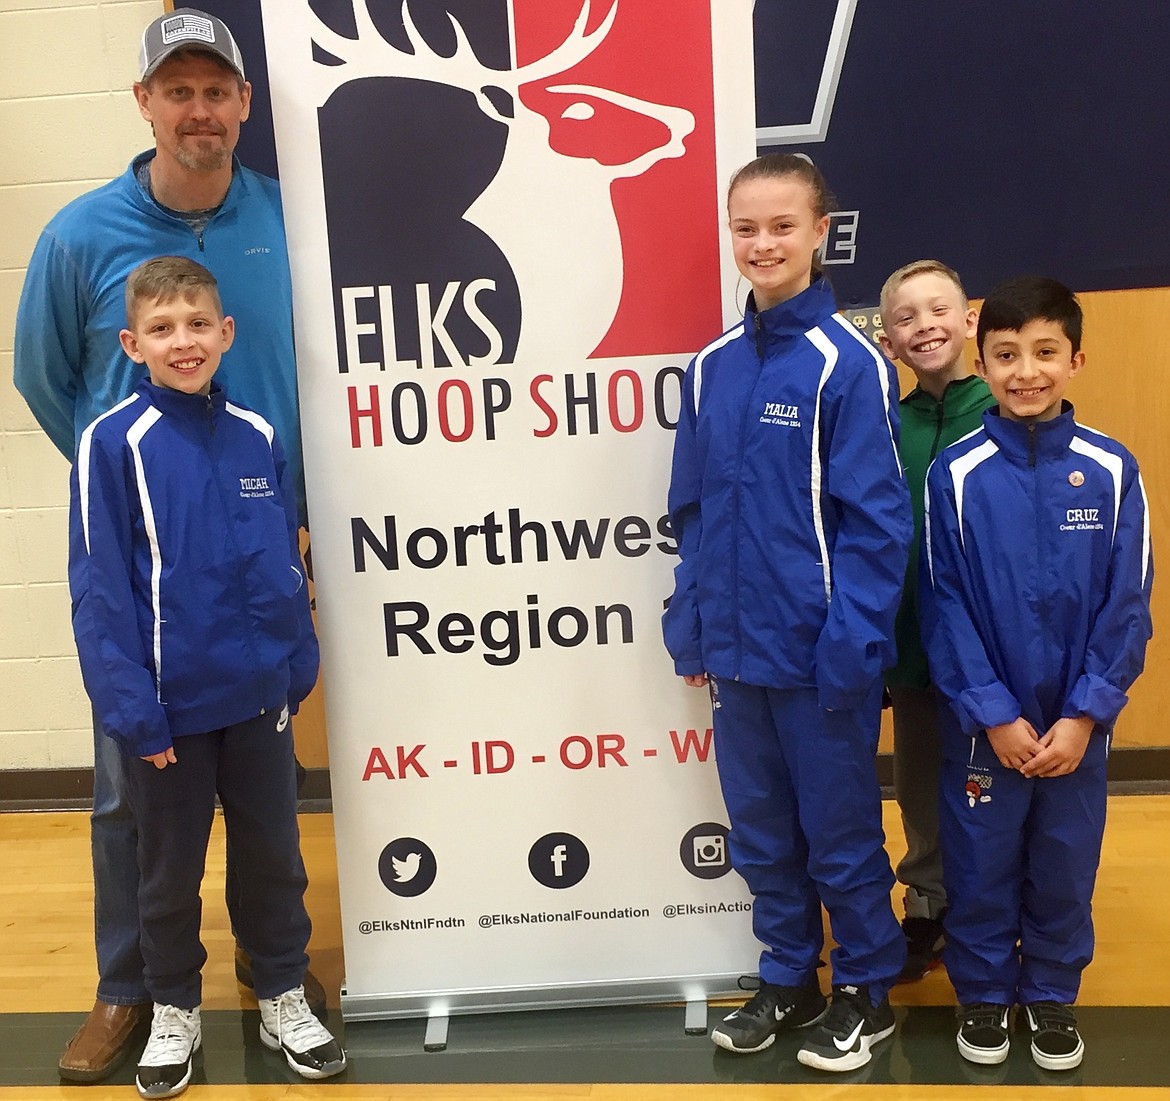 State champions from the Coeur d’Alene Elks Lodge who competed at the regional Elks Hoop Shoot in Pasco, Wash., were, from left, Micah Hodges, Malia Miller and Cruz Andrich. Back left is Todd Stoddard, Coeur d’Alene Elks Hoop Shoot director.